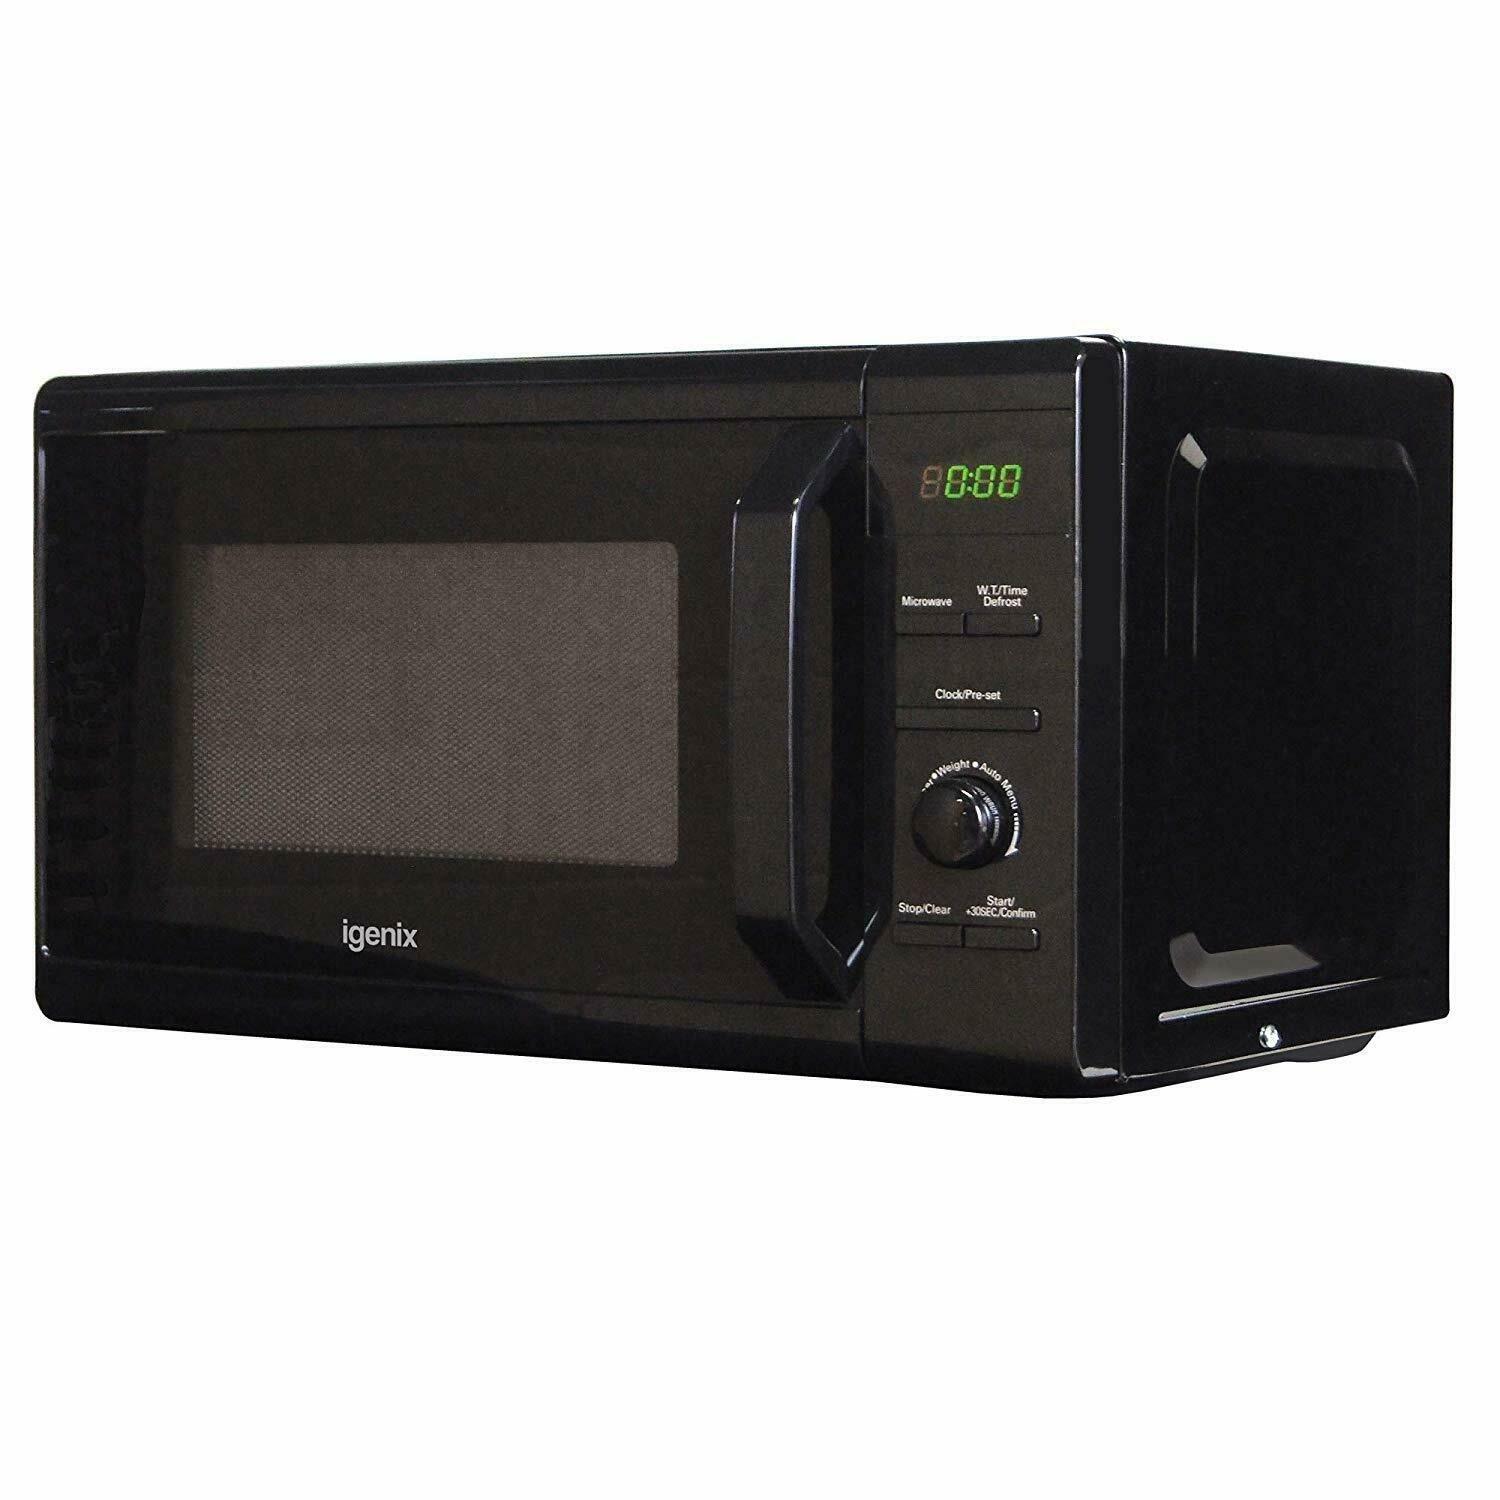 Digital Microwave, 8 Auto Cooking Programmes